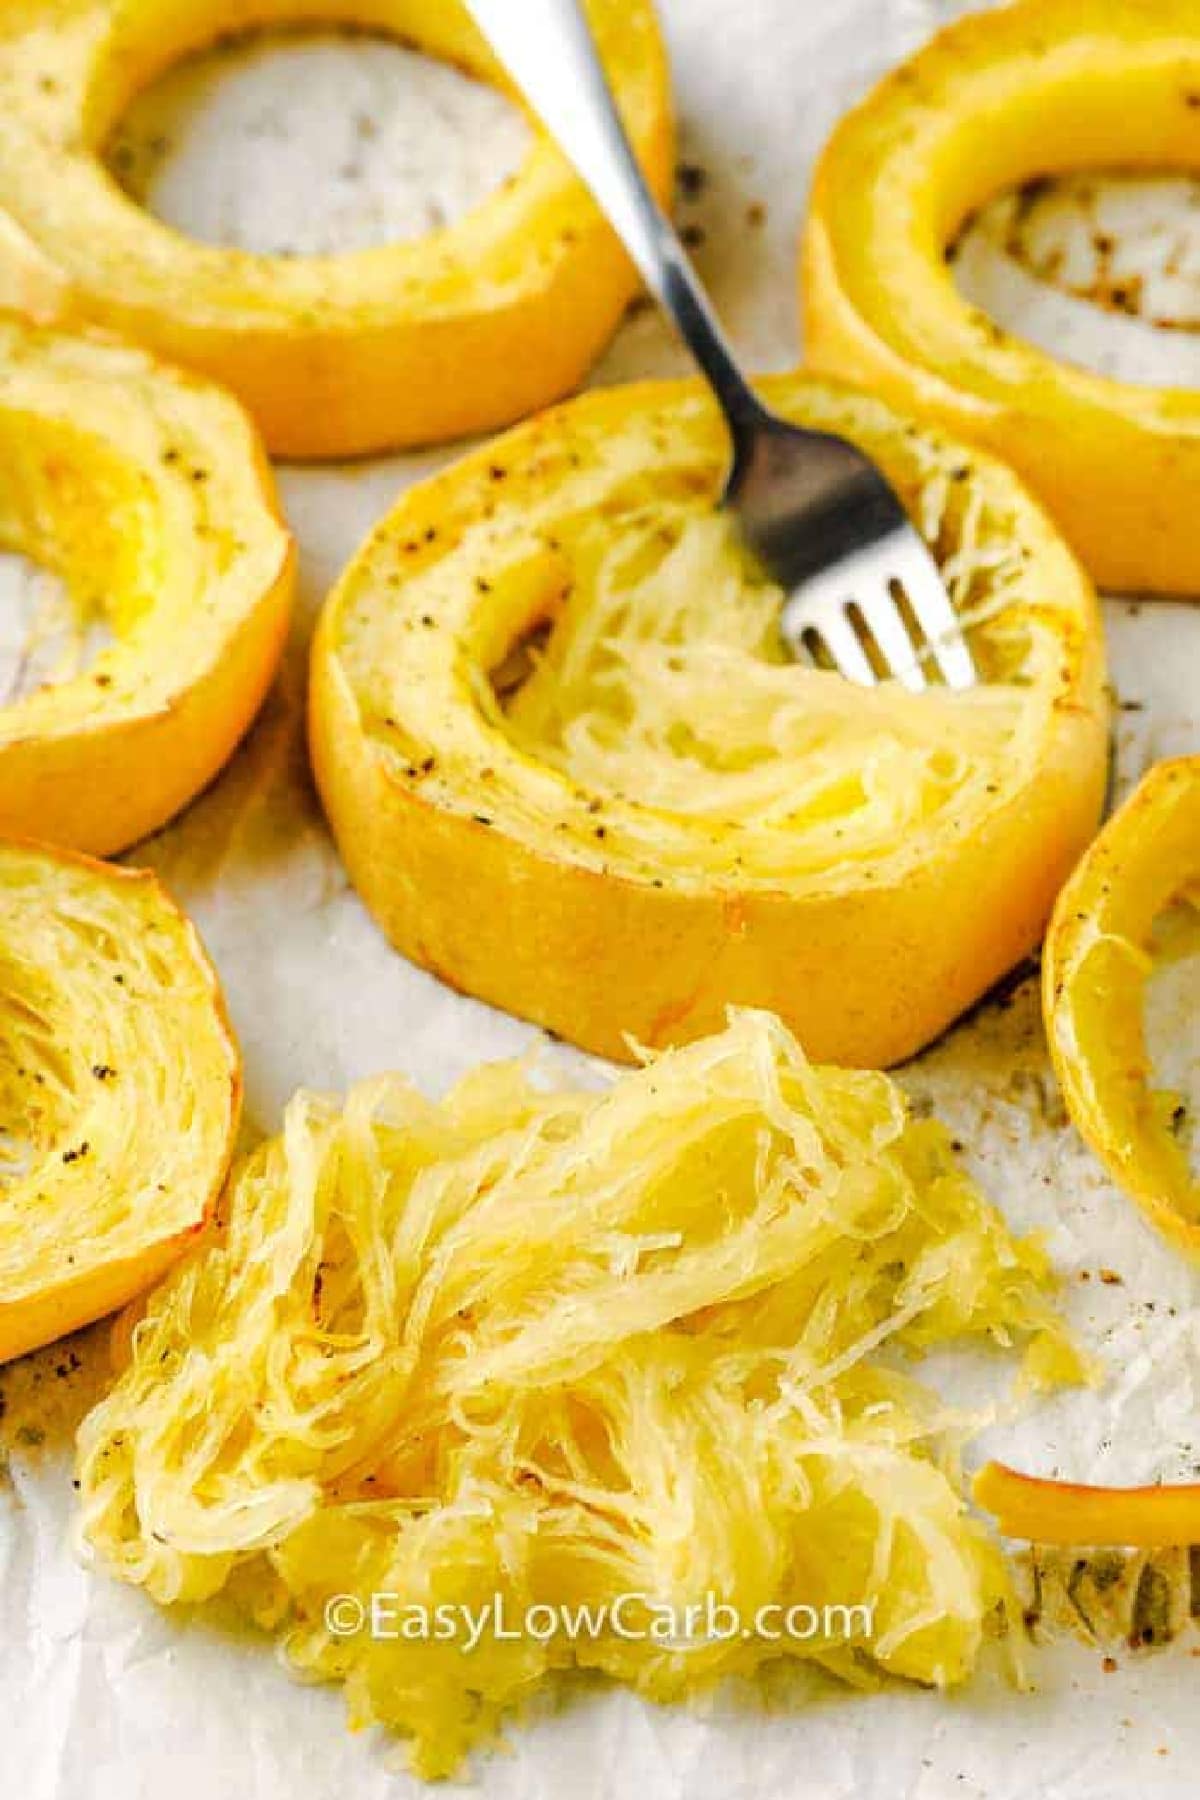 Baked spaghetti squash on a tray, with a fork pulling out the strands.